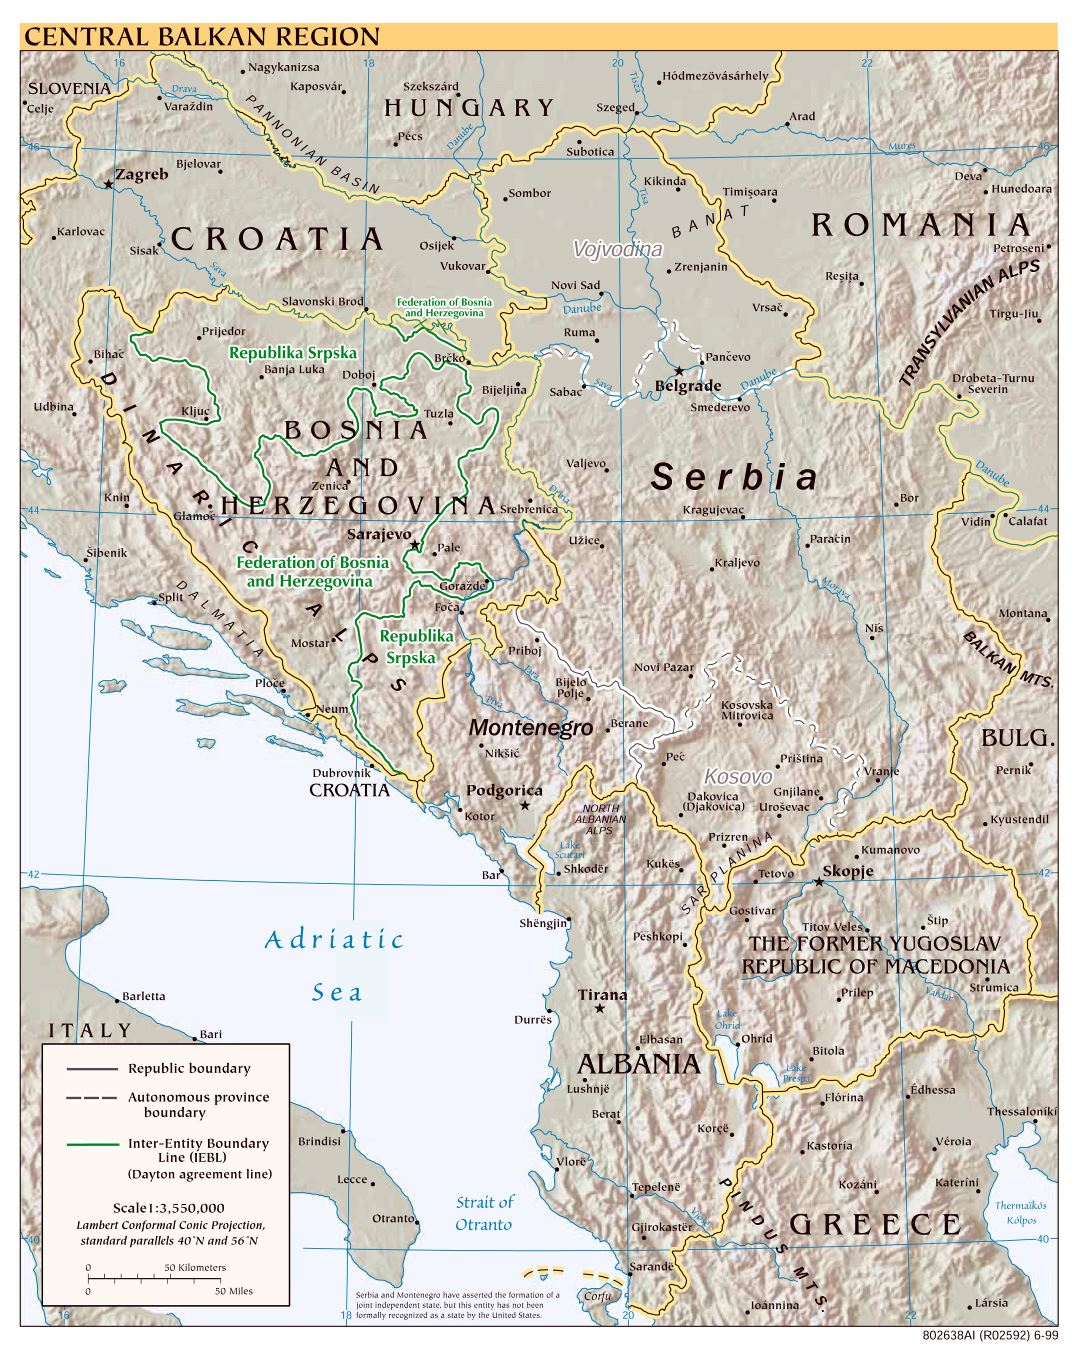 Large scale political map of Central Balkan Region with relief, roads and major cities - 1999